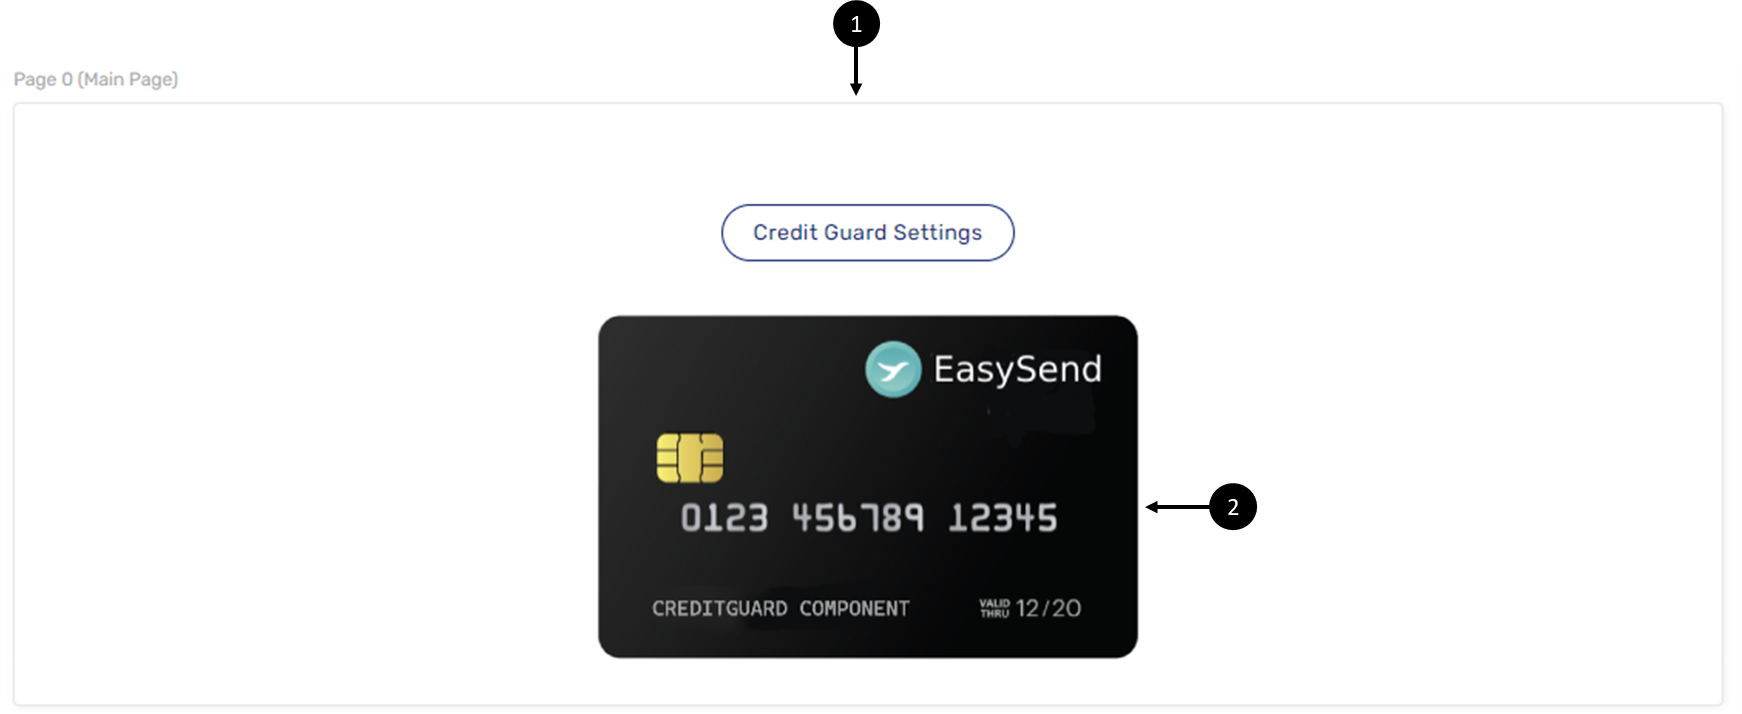 A Main Page with an added Credit Guard component.